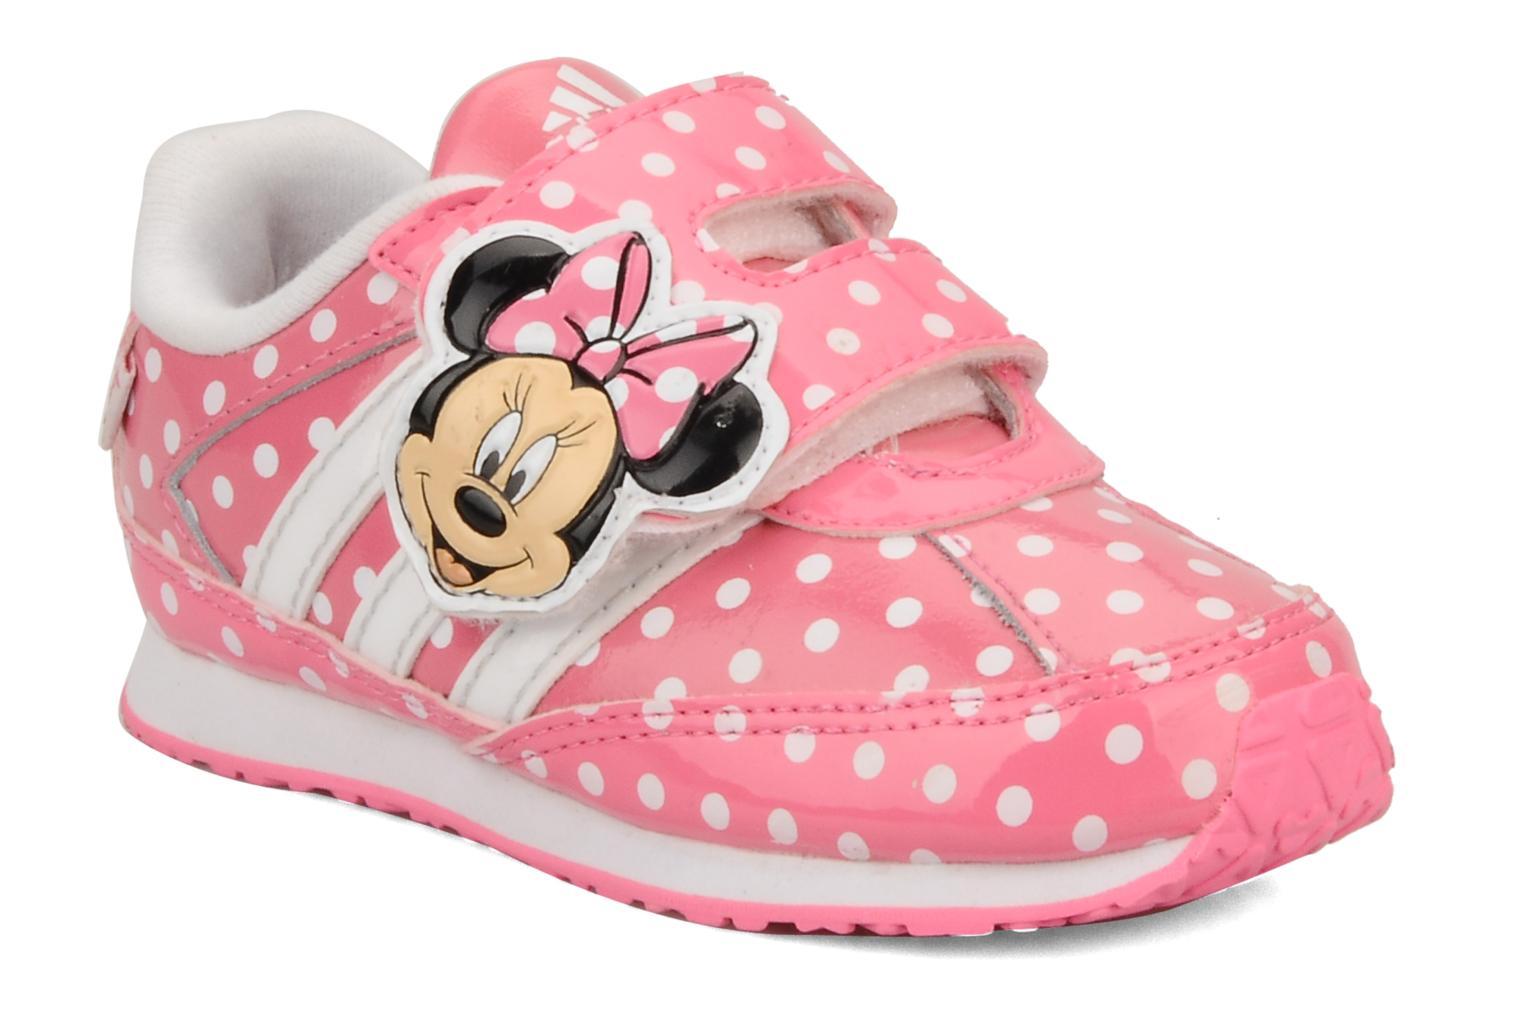 Adidas Performance Disney minnie i Trainers in Pink at Sarenza.co.uk ...